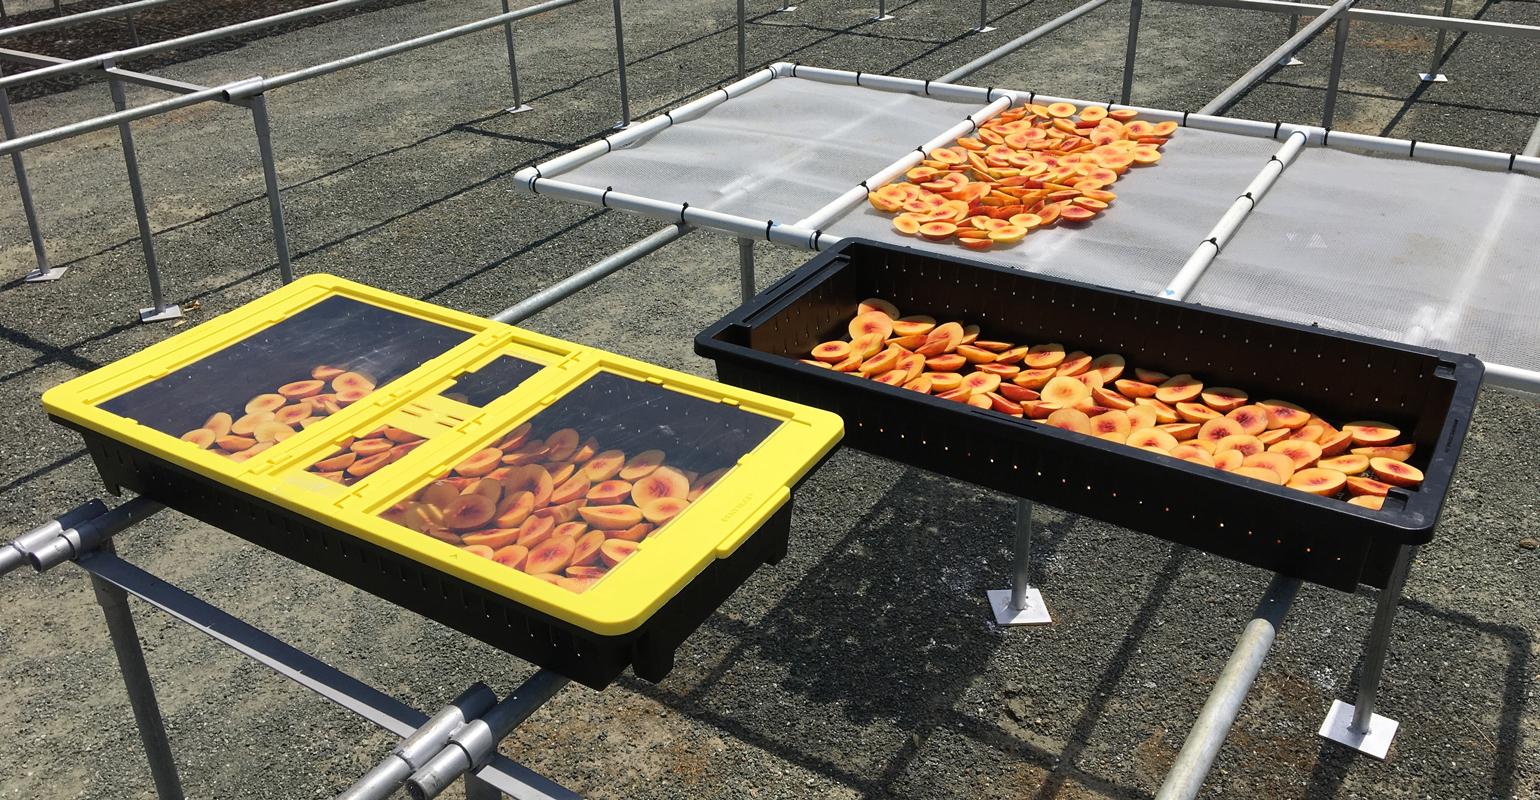 This Solar-Powered Dehydrator Could Help Small Farmers Reduce Food